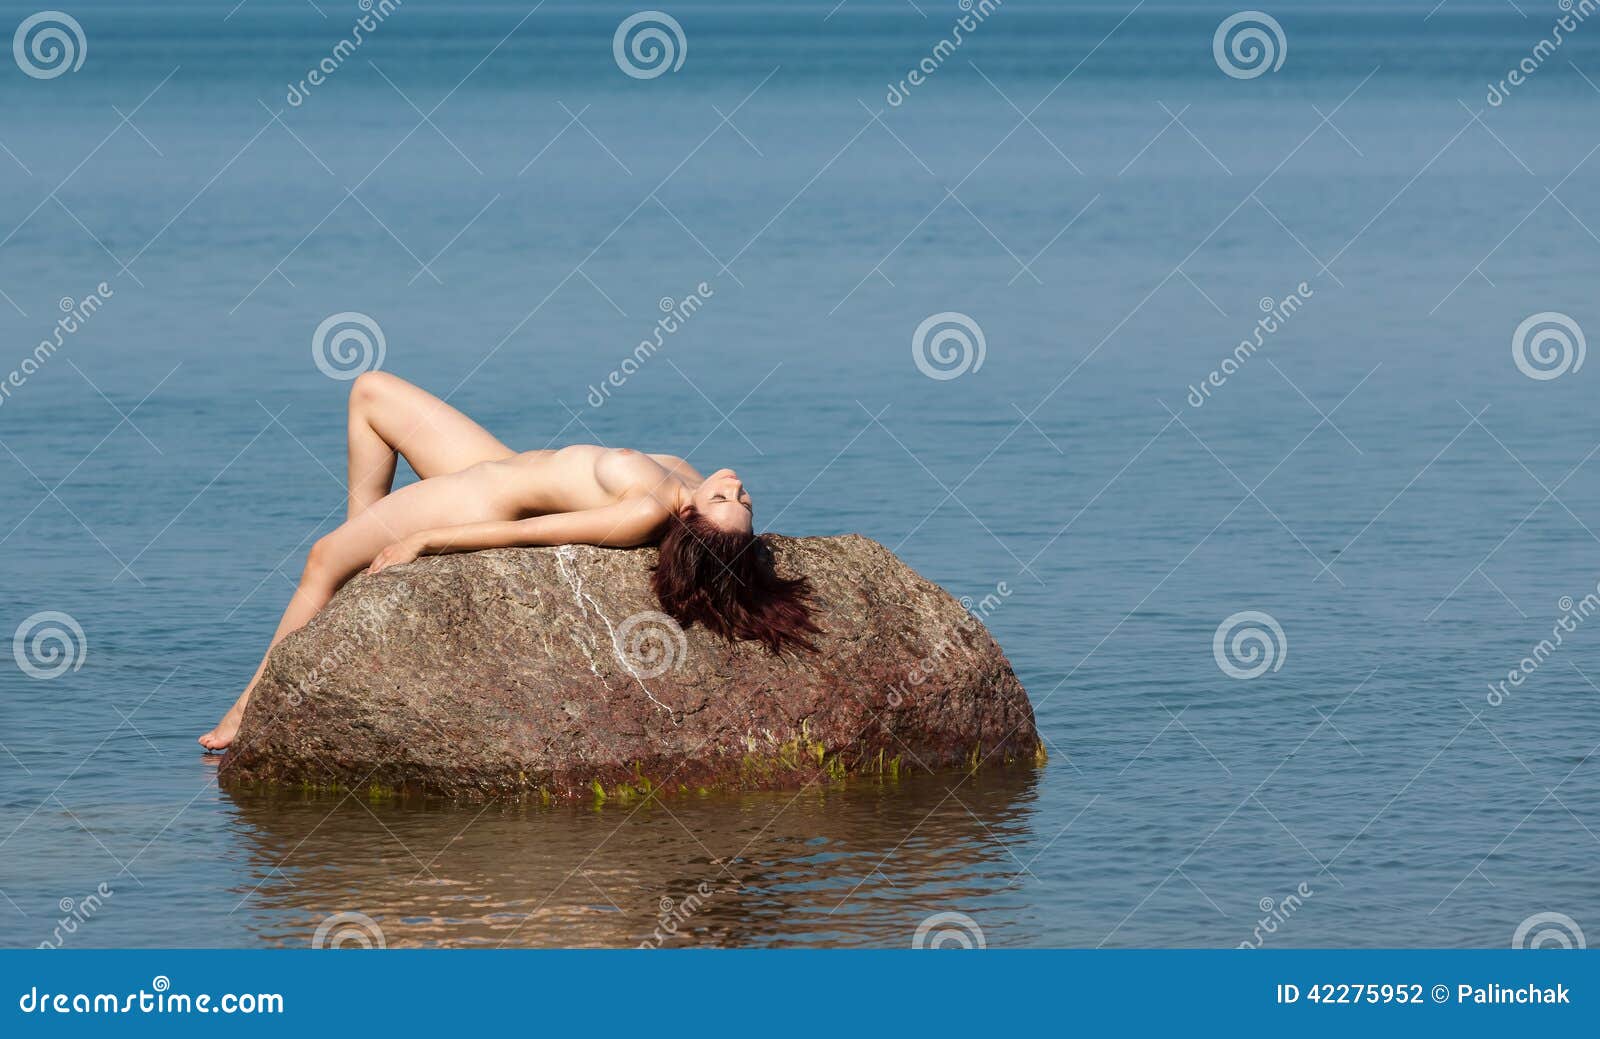 Nude Woman Lying on a Rock in the Sea Stock Photo - Image of